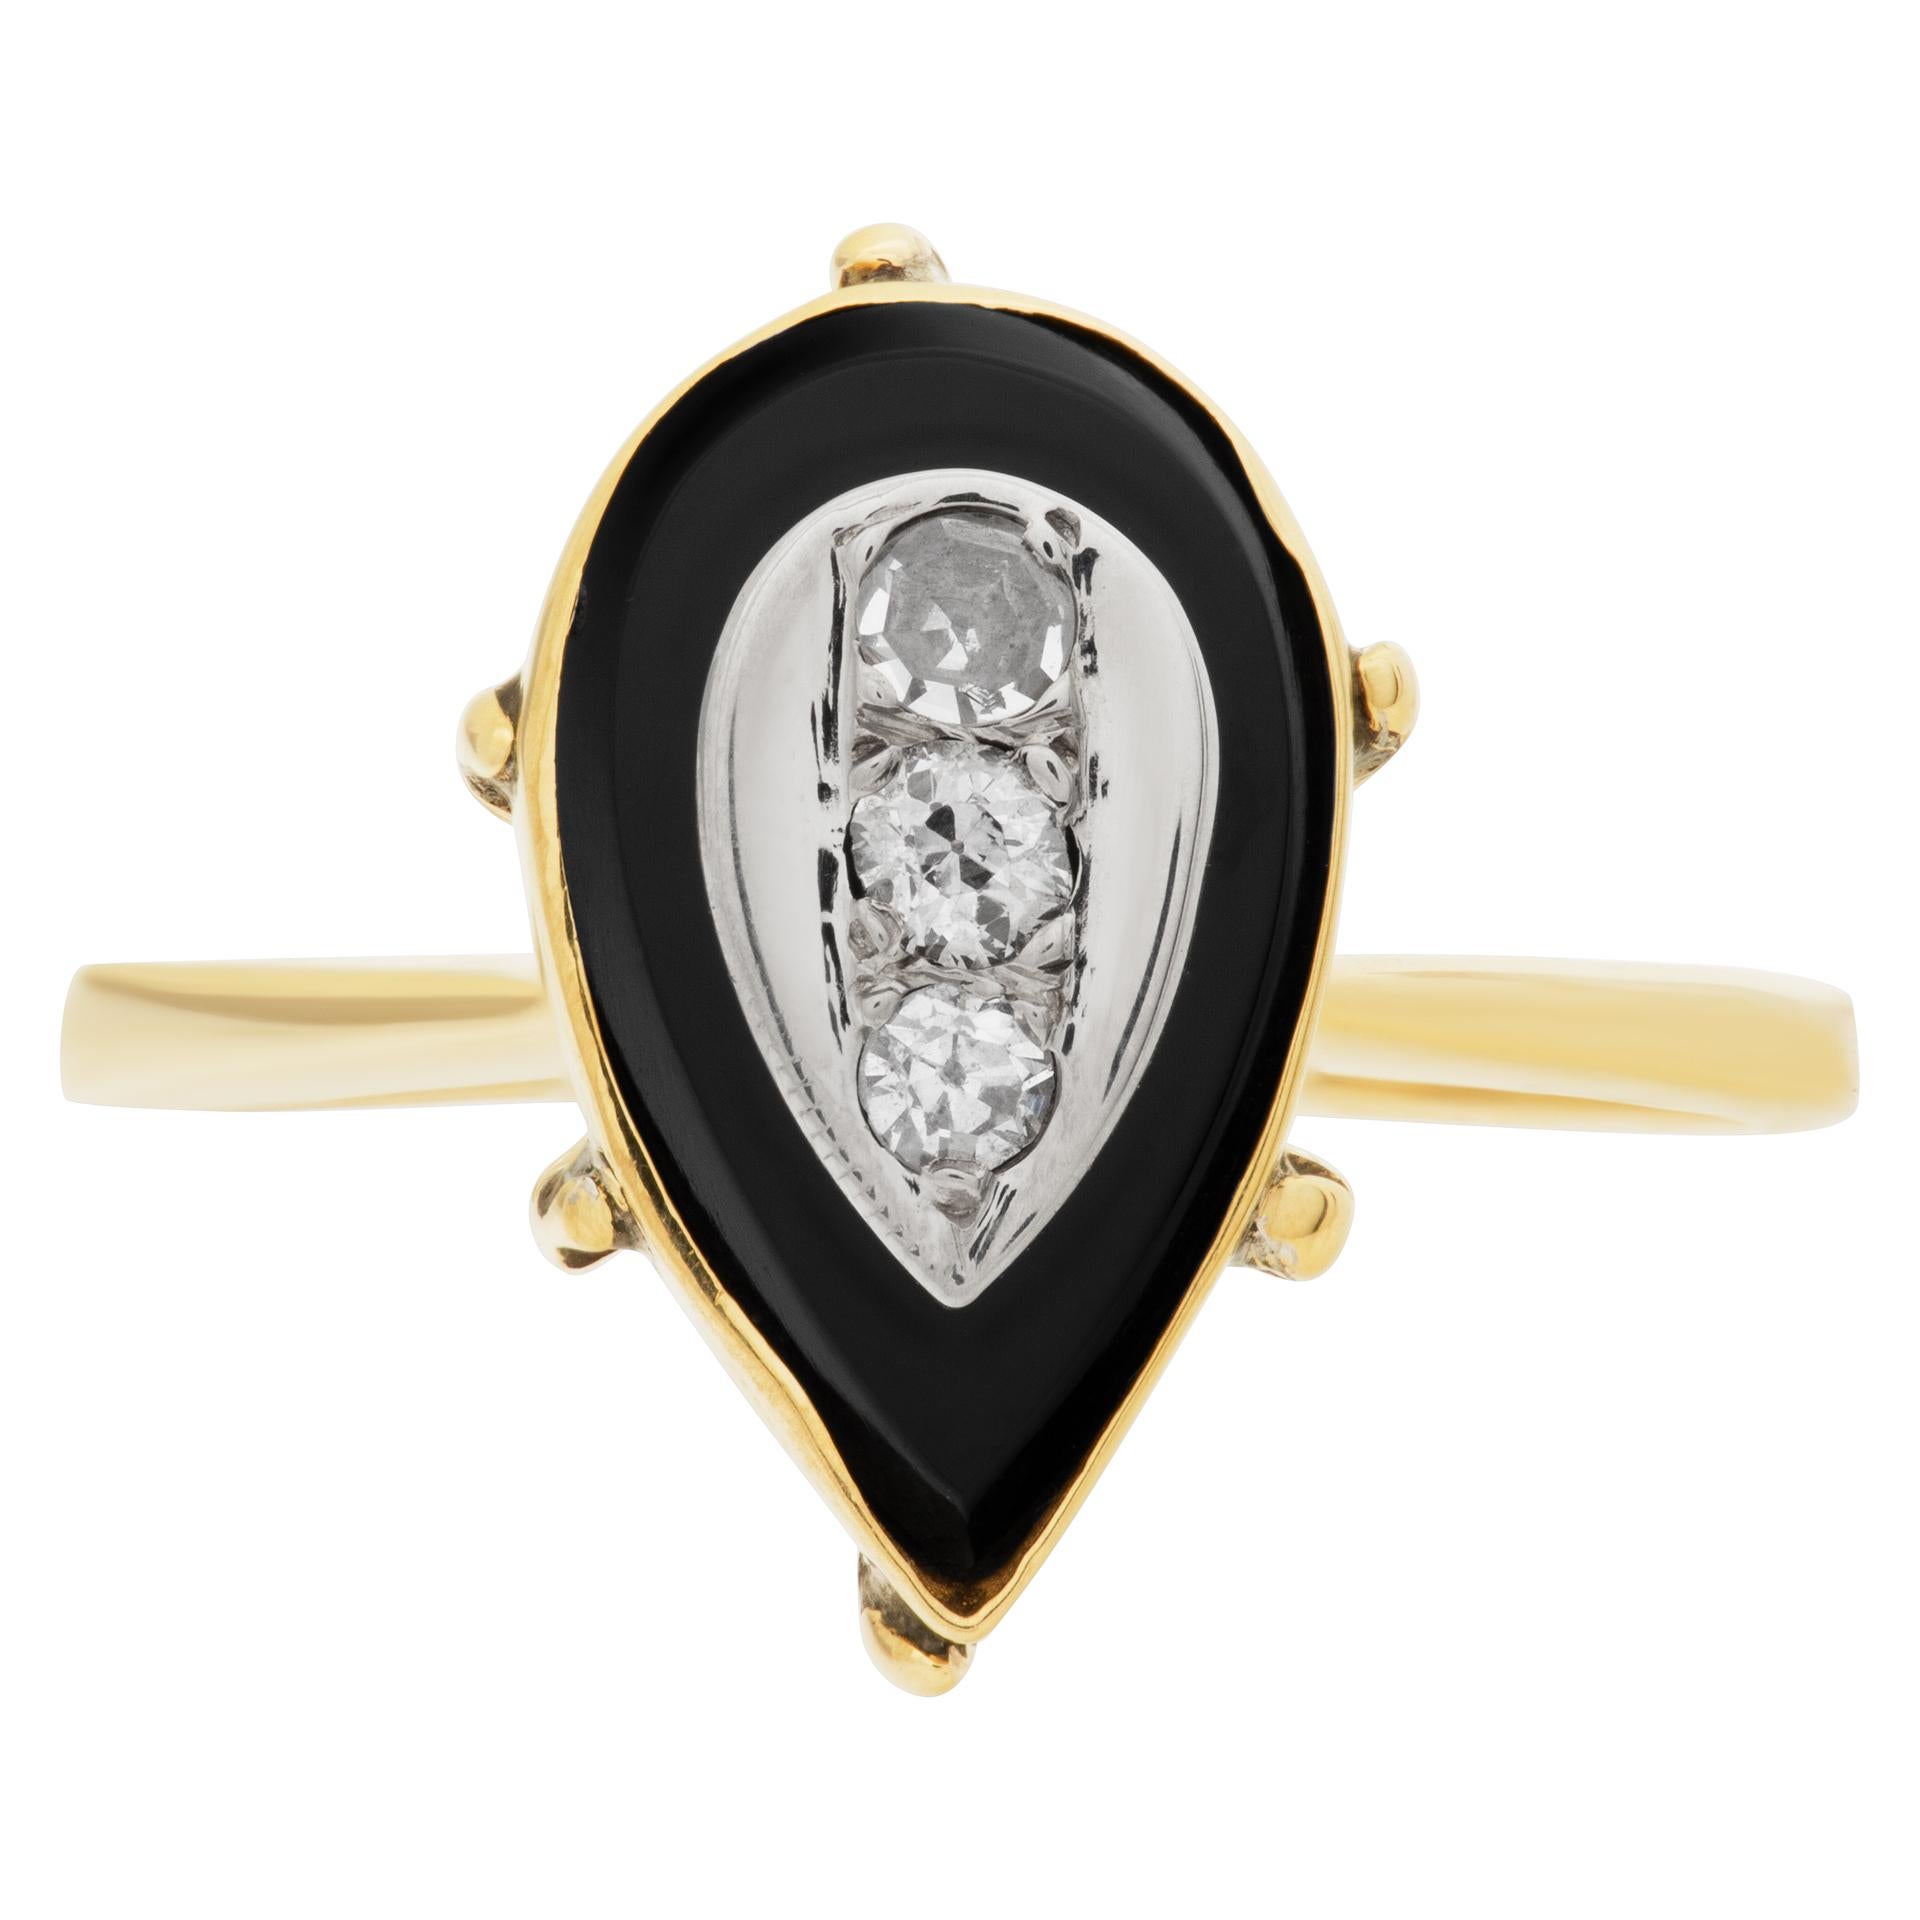 Vintage tear drop shaped diamond and onyx ring in 14k yellow gold with approximately 3 round diamond totaling approx 0.10 carat.Size 7.25

This Diamond ring is currently size 0 and some items can be sized up or down, please ask! It weighs 2.4